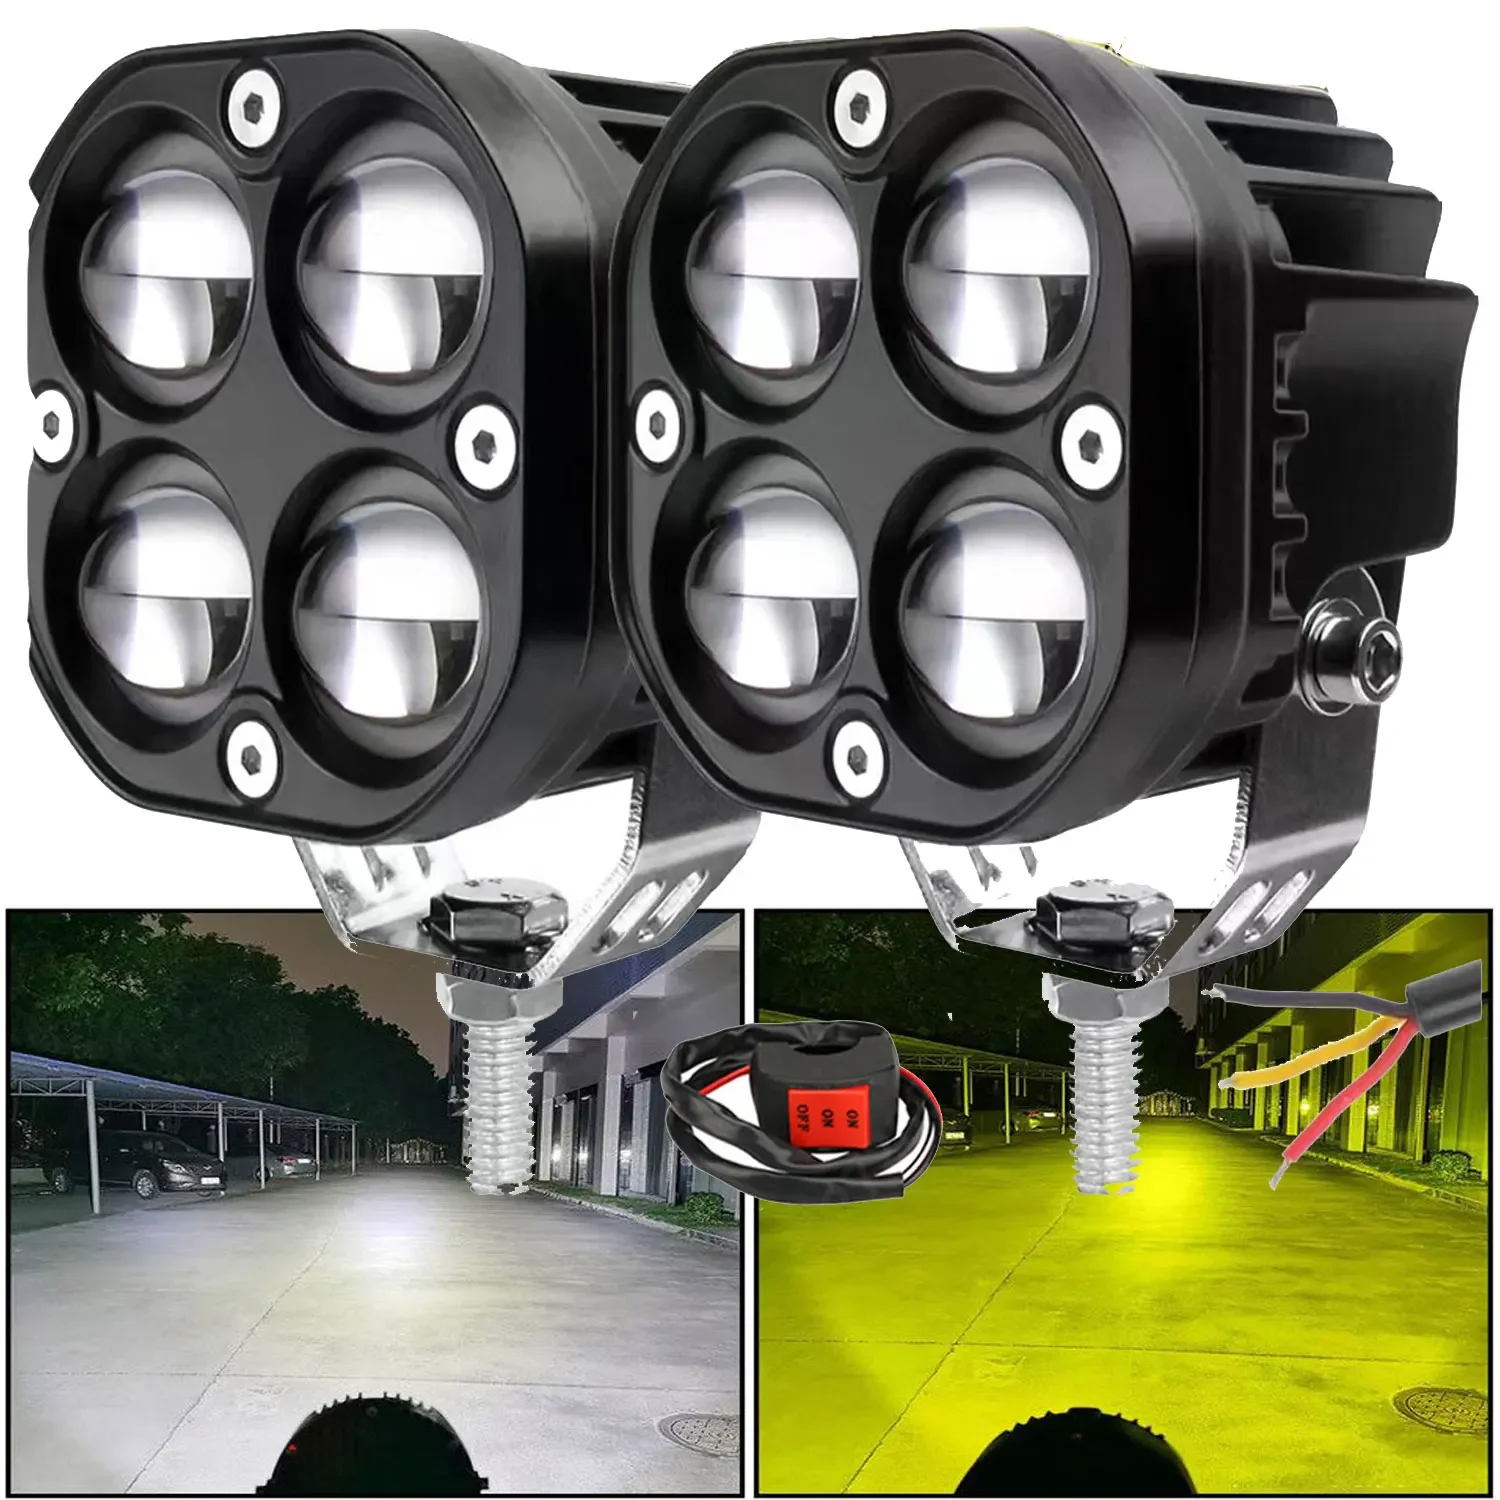 

Auxiliary Led Headlights for 4x4 Off Road 200W 3 Inch Dual Color Len Lighthouse Moto Long Range 12V 24V Running Truck Car SUV